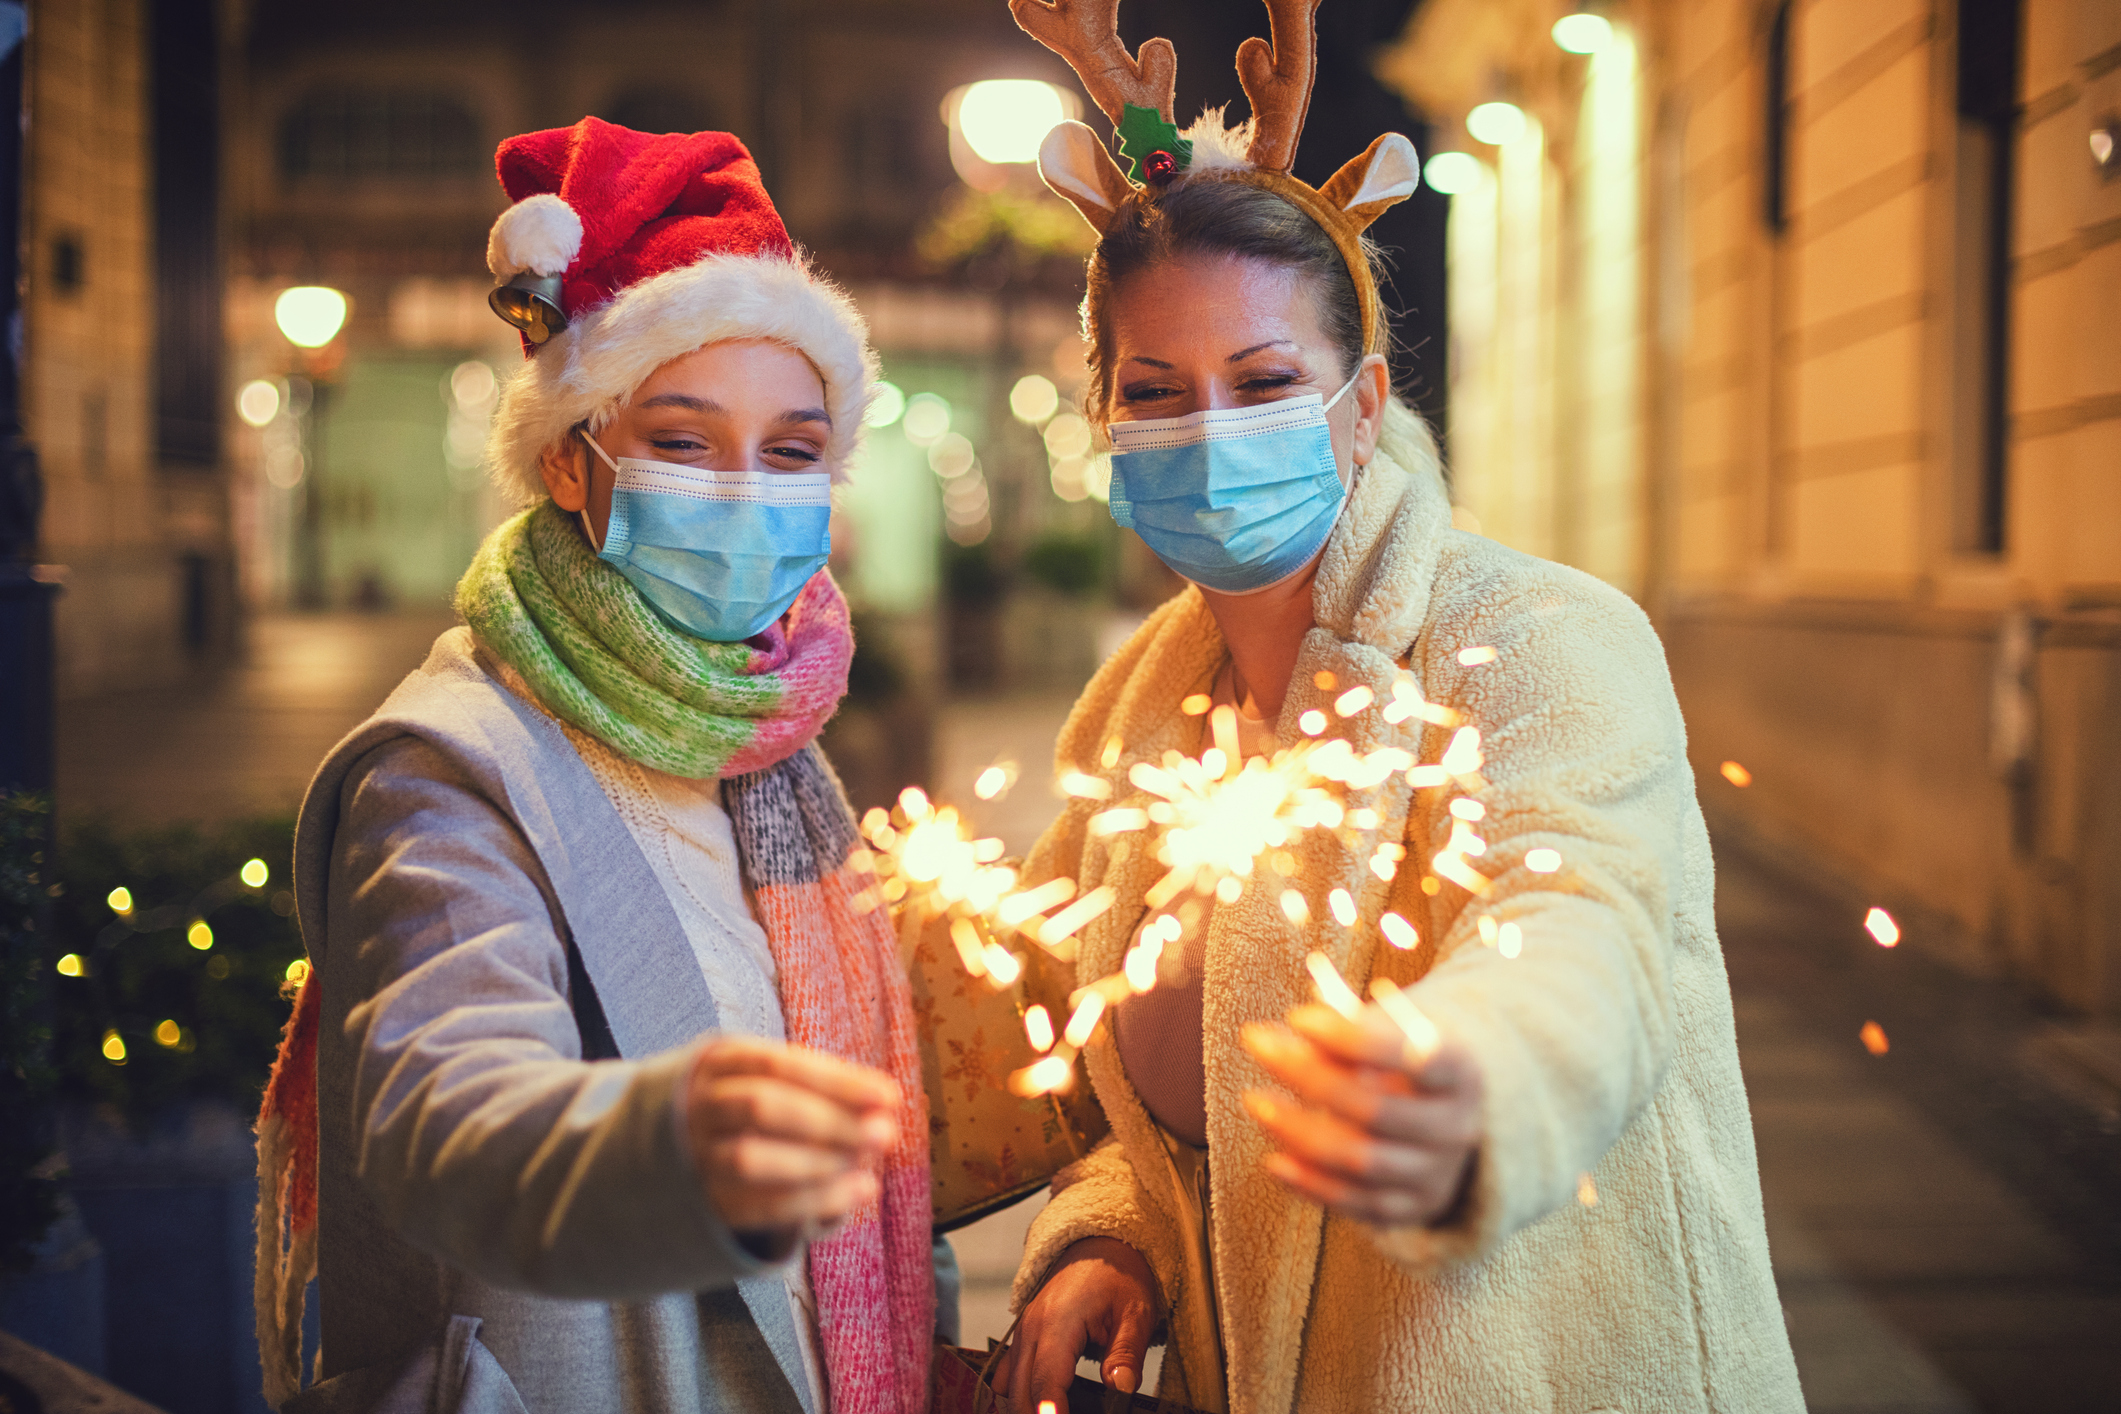 Family having fun while celebrating Christmas during COVID-19 pandemic. They wears a protective mask to protect from coronavirus COVID-19.